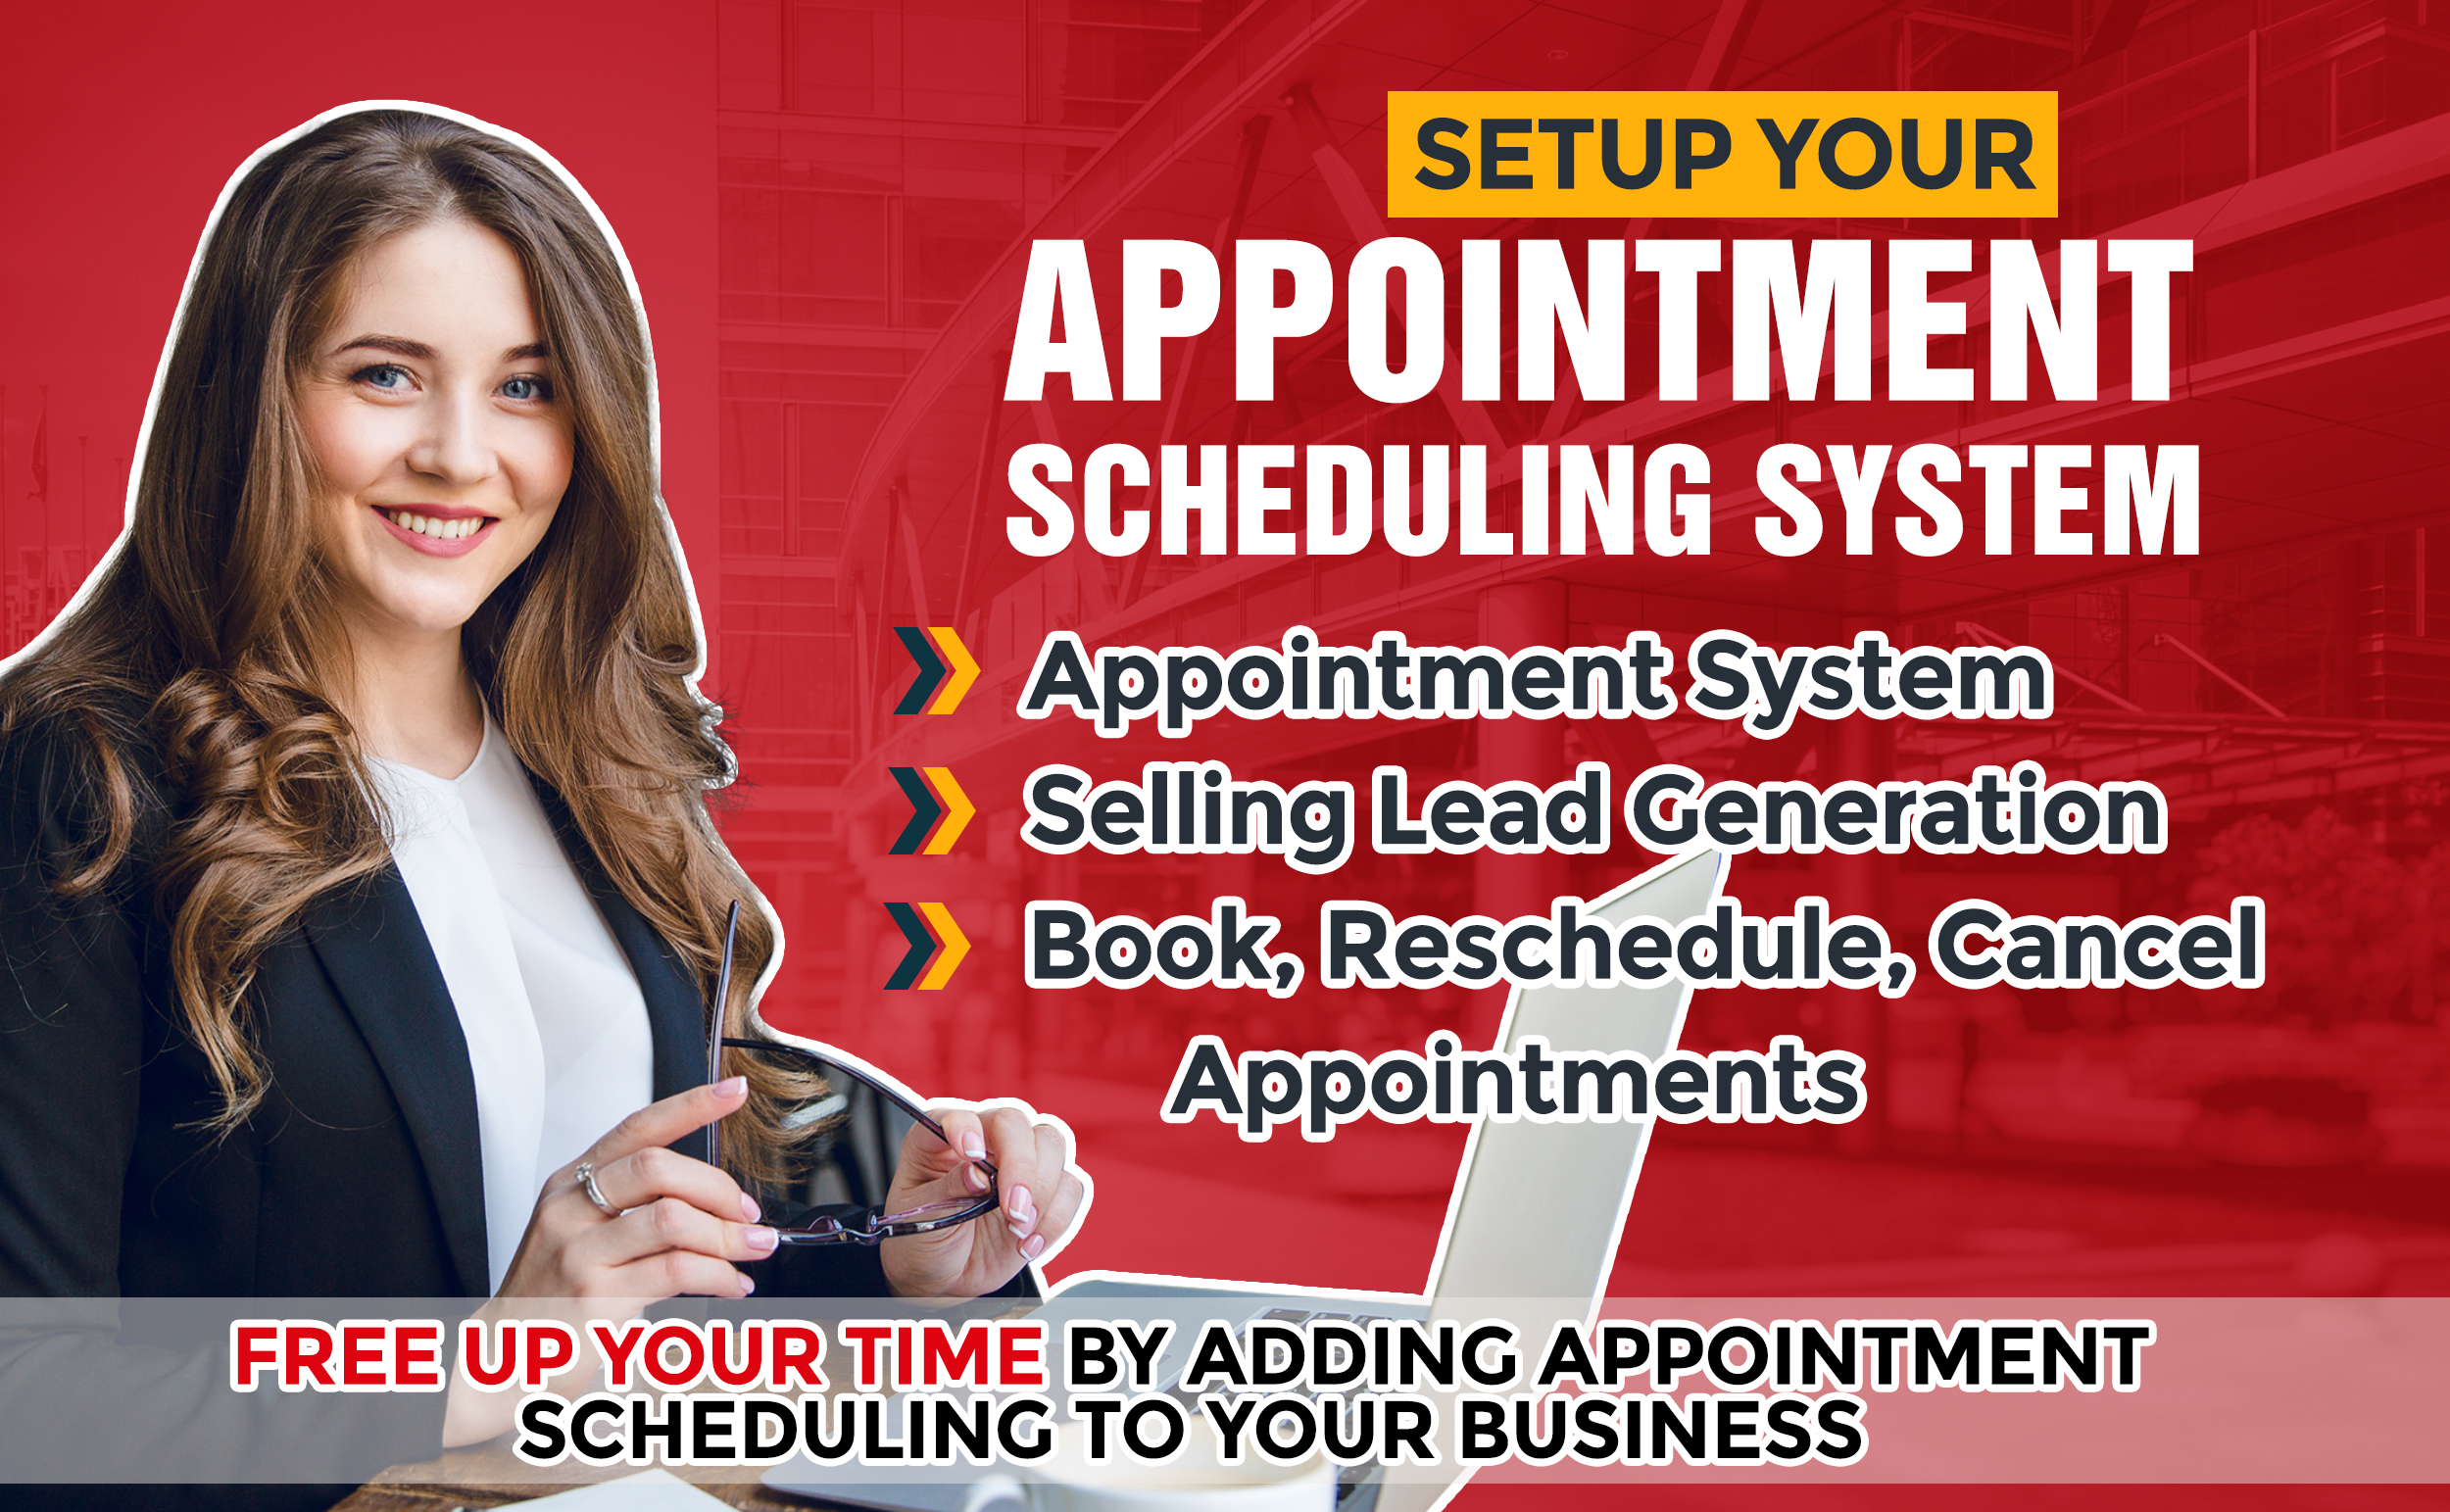 Create appointment scheduling system